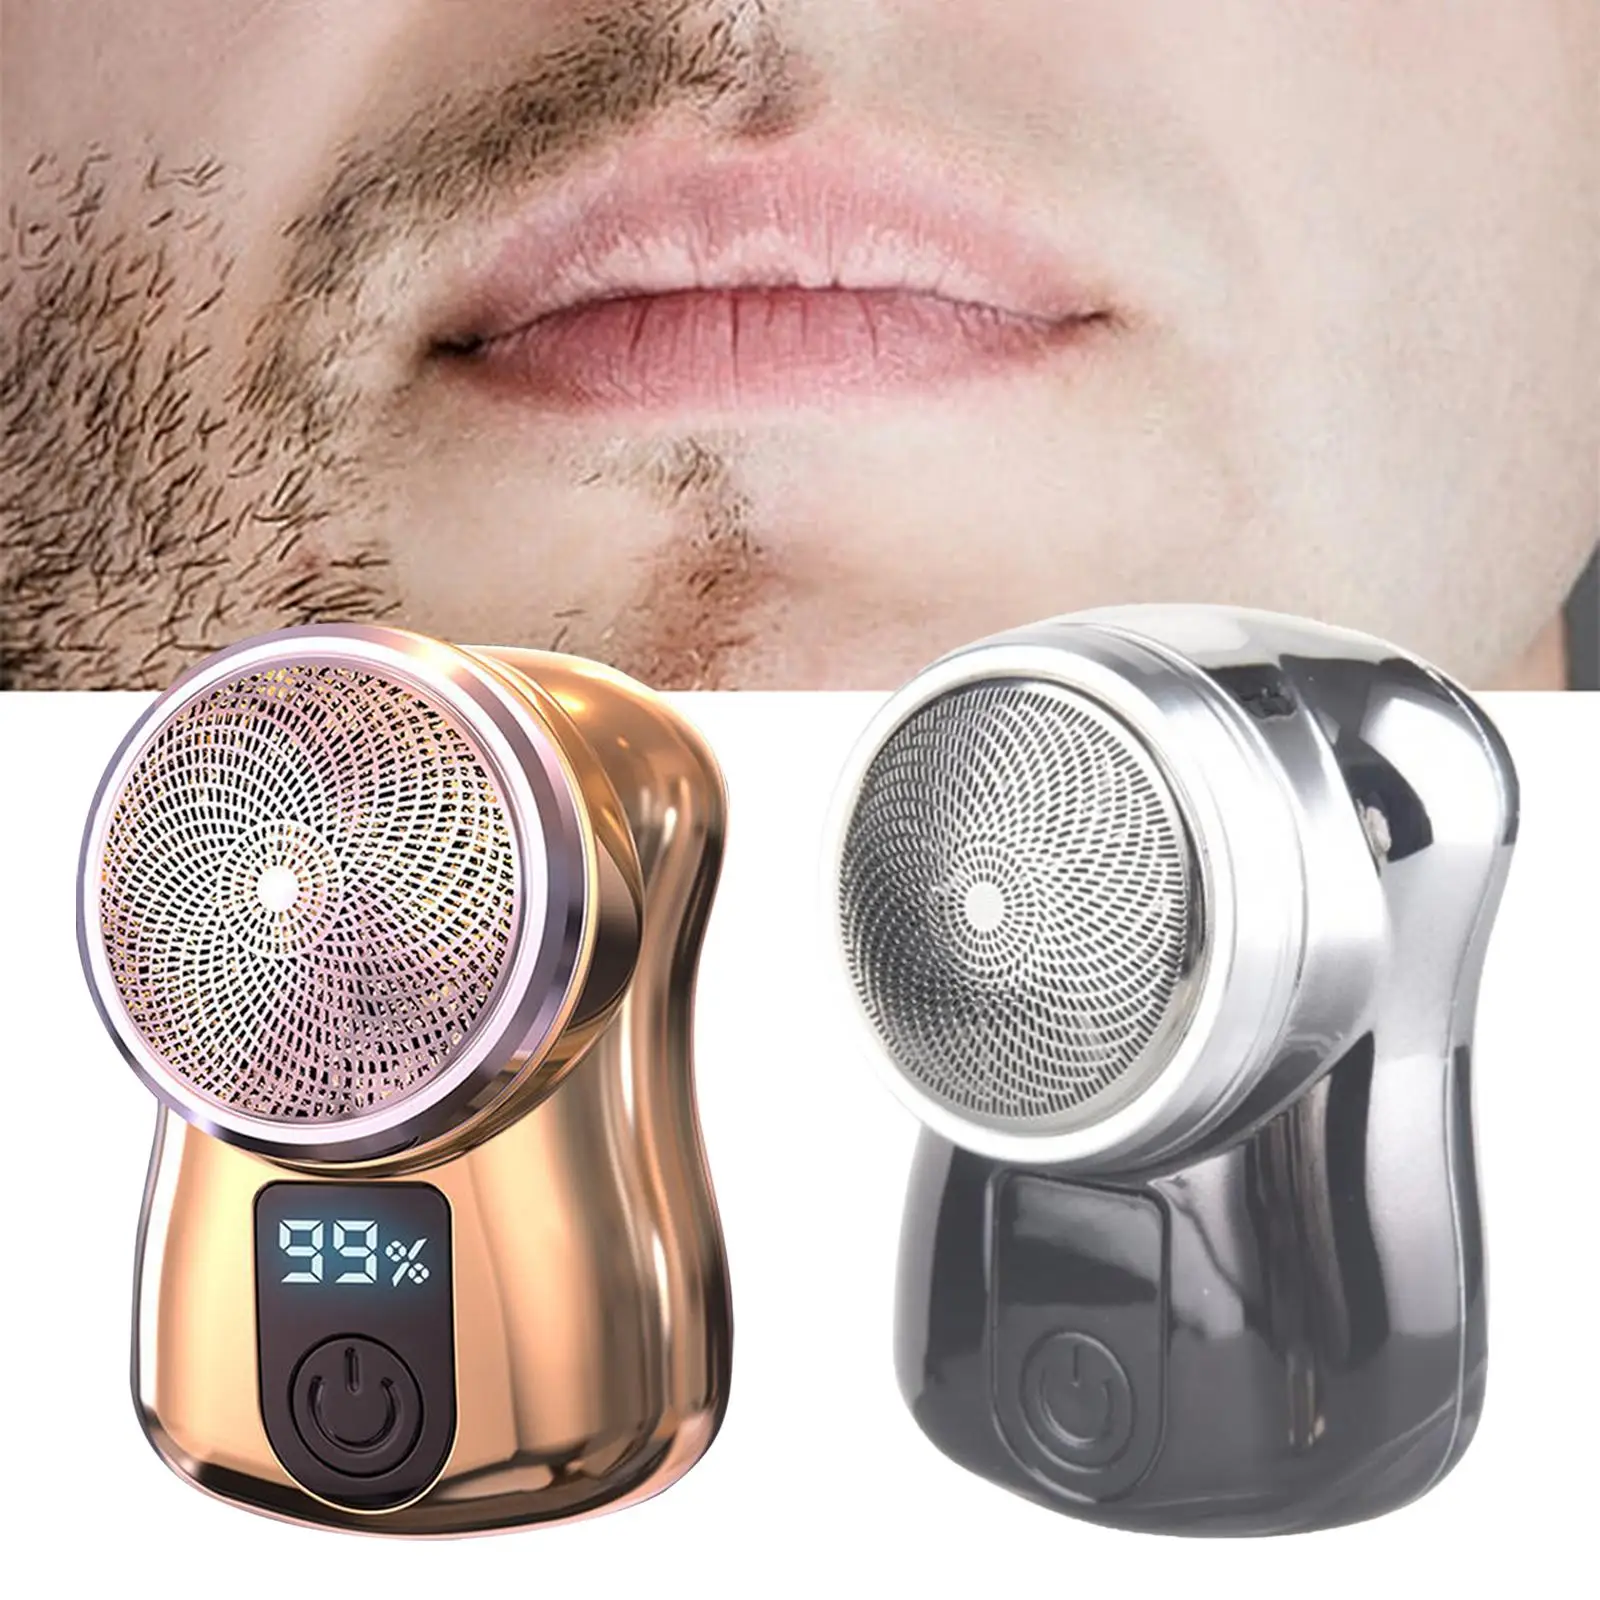 Electric Shaver Portable Pocket Size Strong Power Professional Removable and Washable Head Barber Accessories Beard Razor